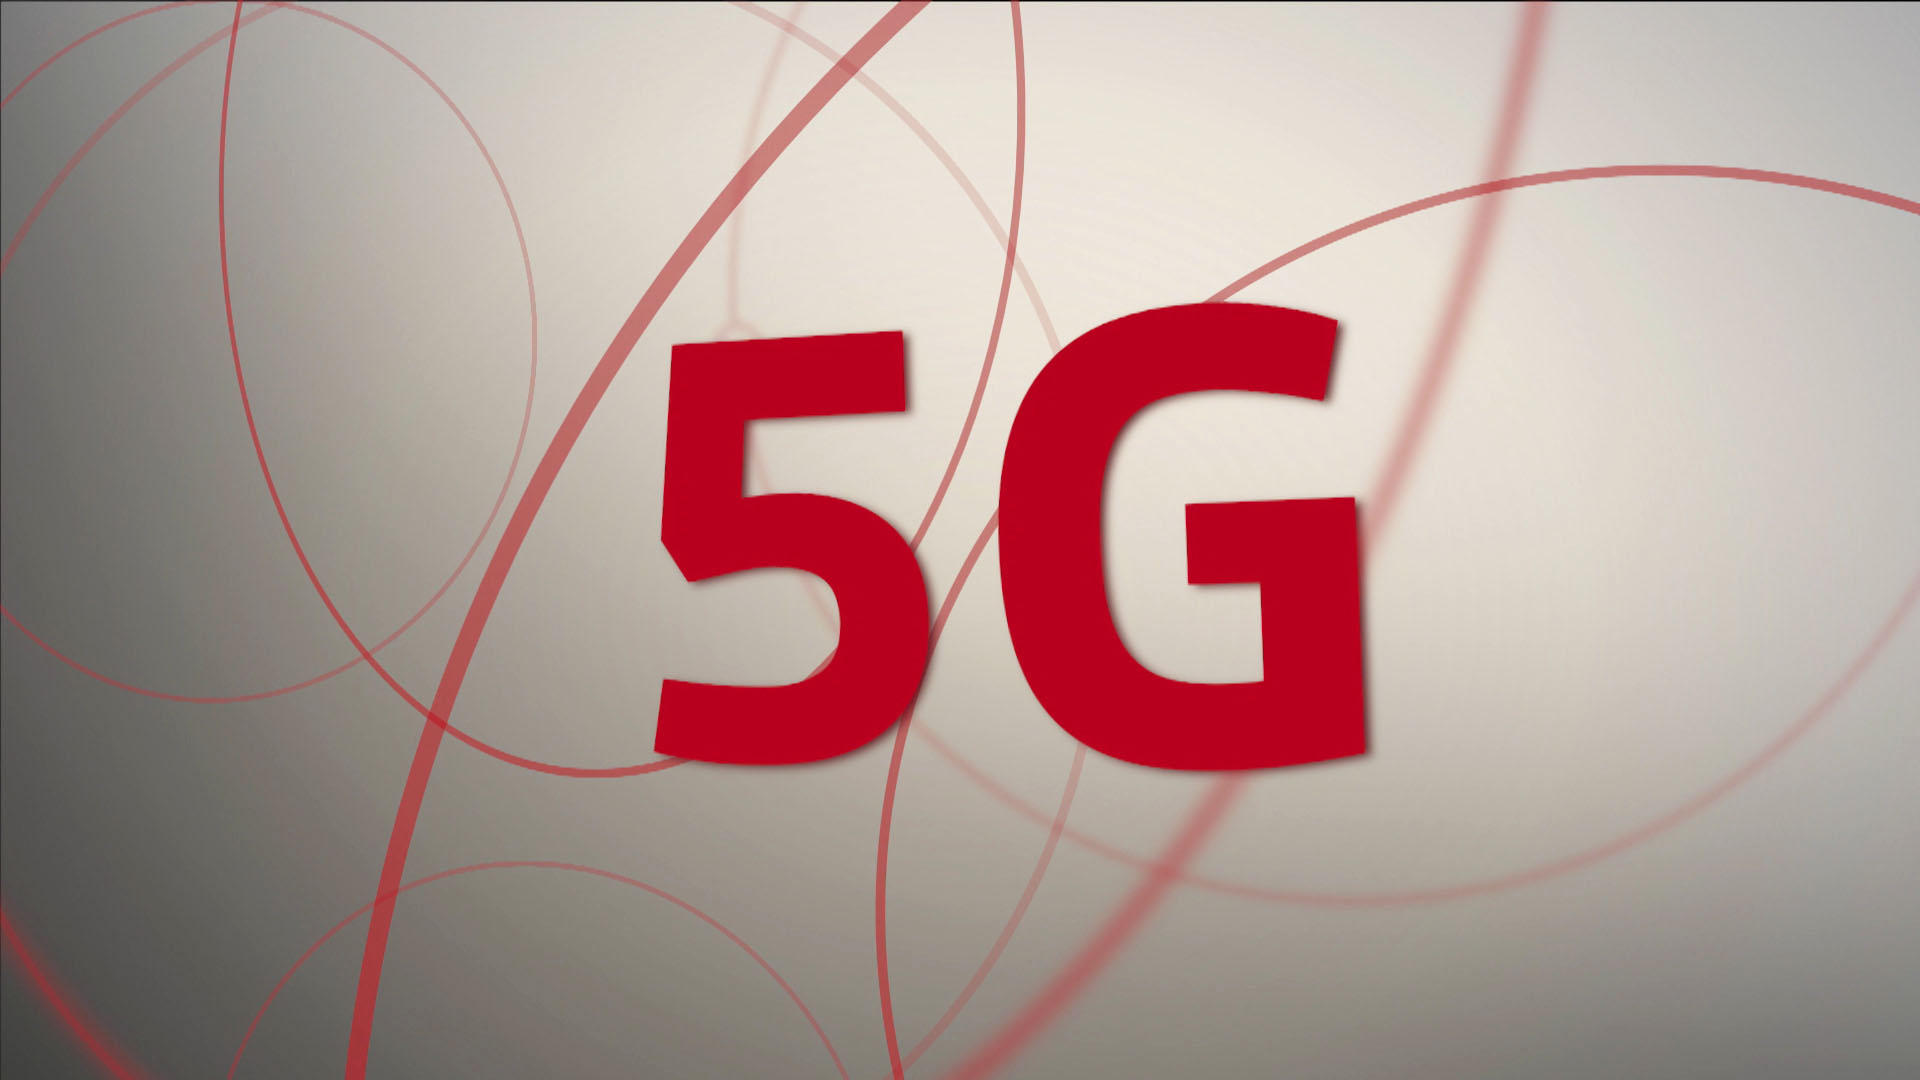 5G picture